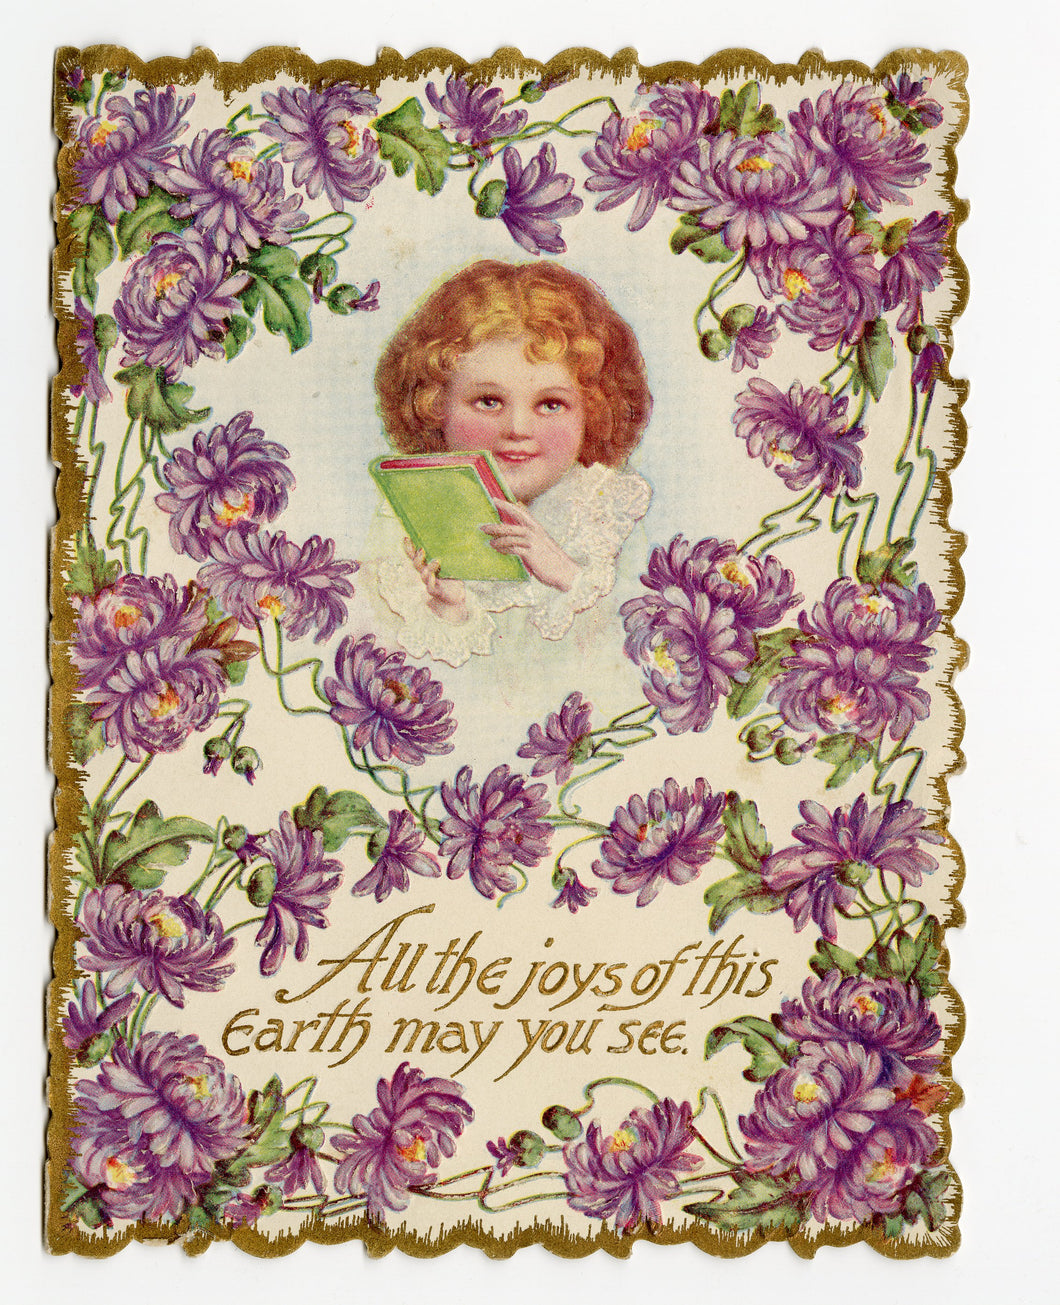 Antique 1910's VALENTINE'S DAY Card Featuring ART NOUVEAU Greeting || 